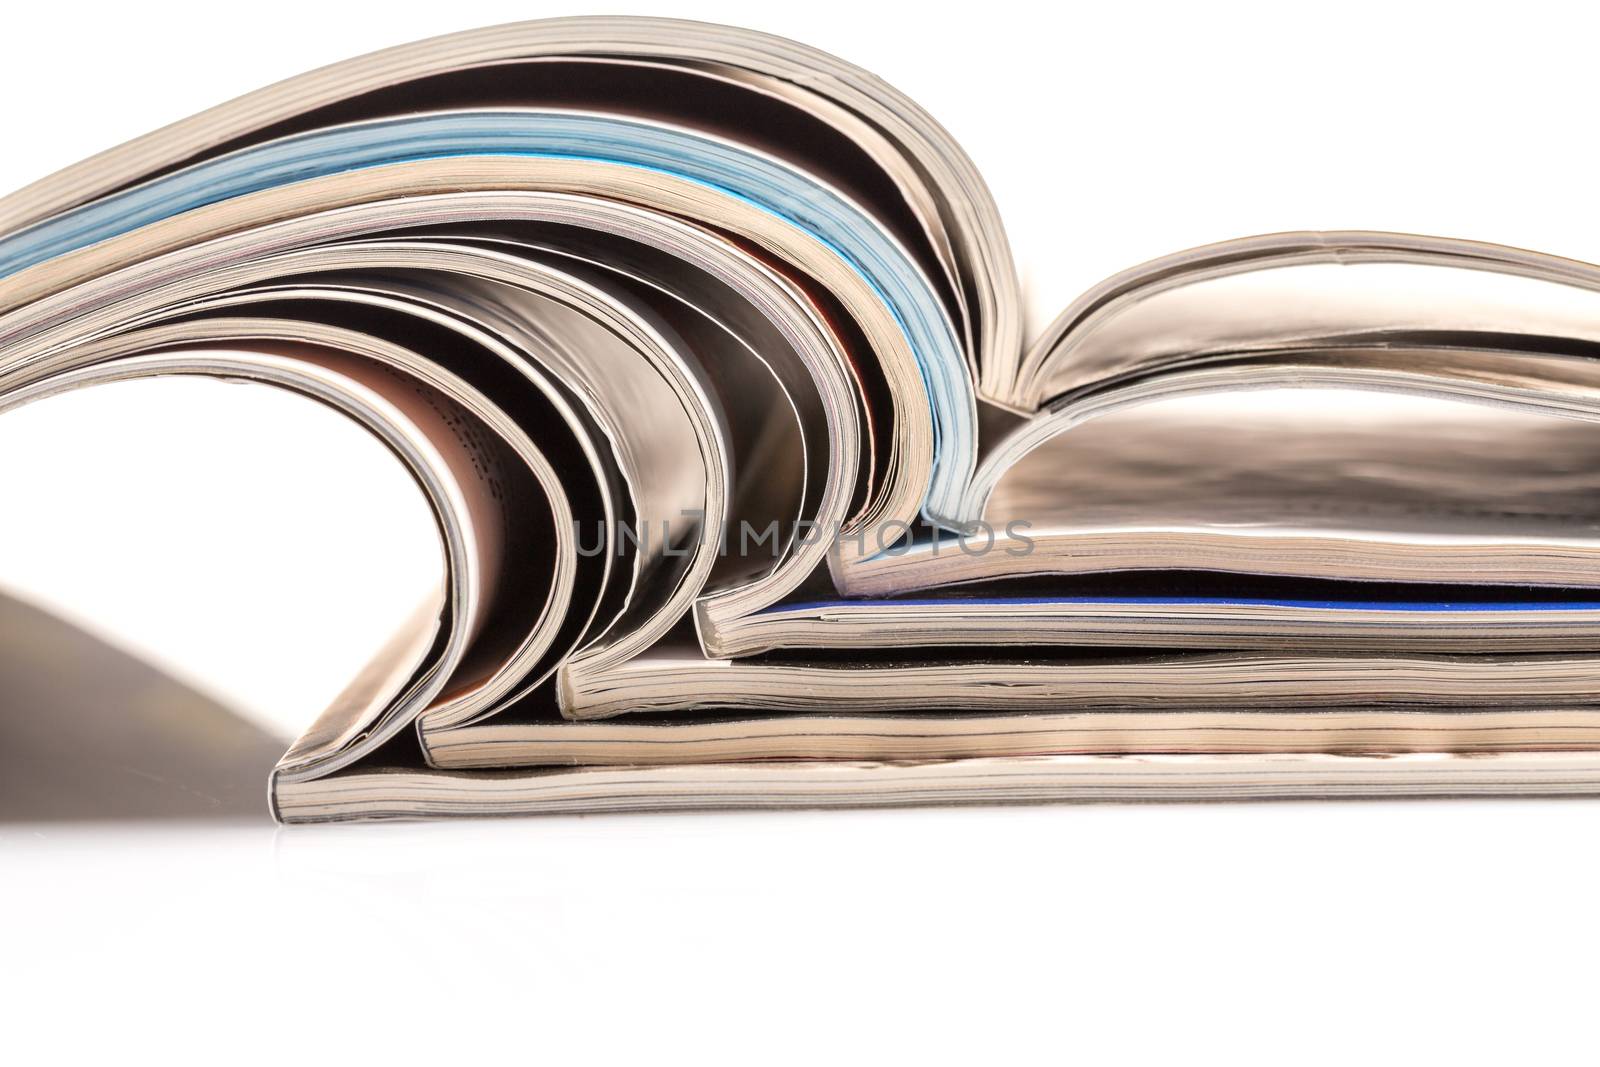 Stack of magazines on white background with reflection